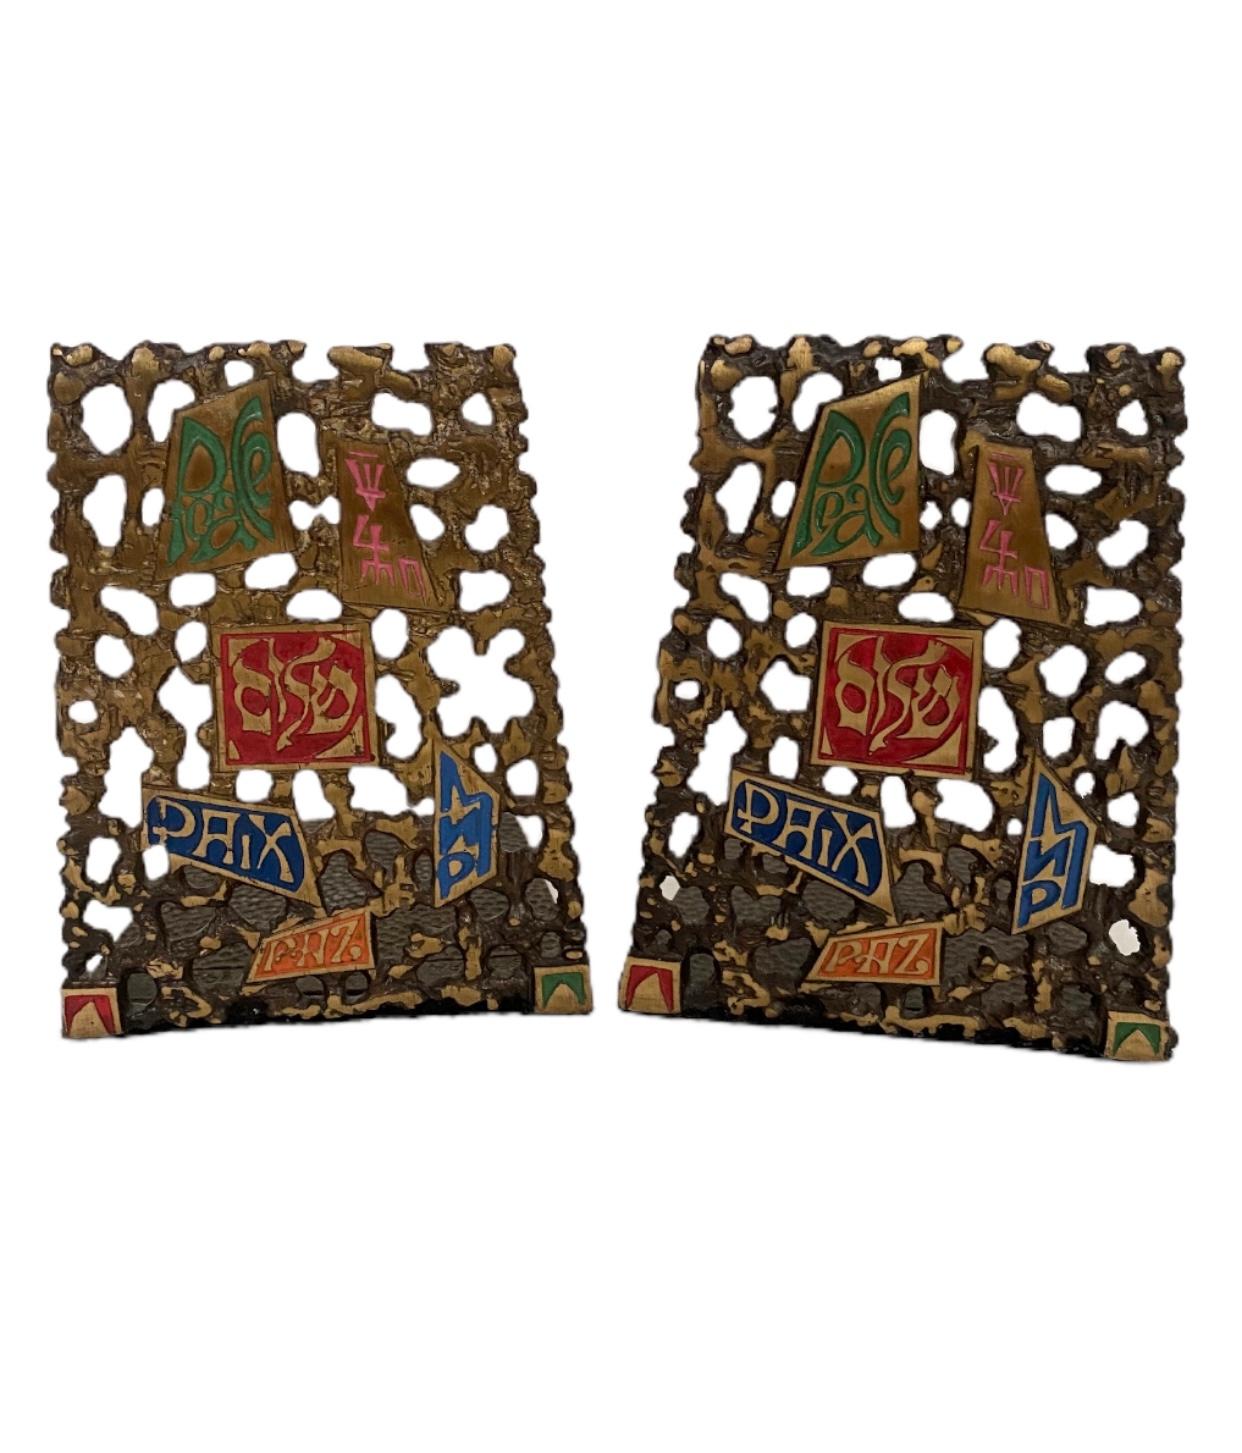 Beautiful pair of Midcentury modern brass Shalom Judaica bookends. Brass with lovely patina with color enameled accents. Felt under the stands for use on multiple surfaces, signed “Tree of Life” on the back.